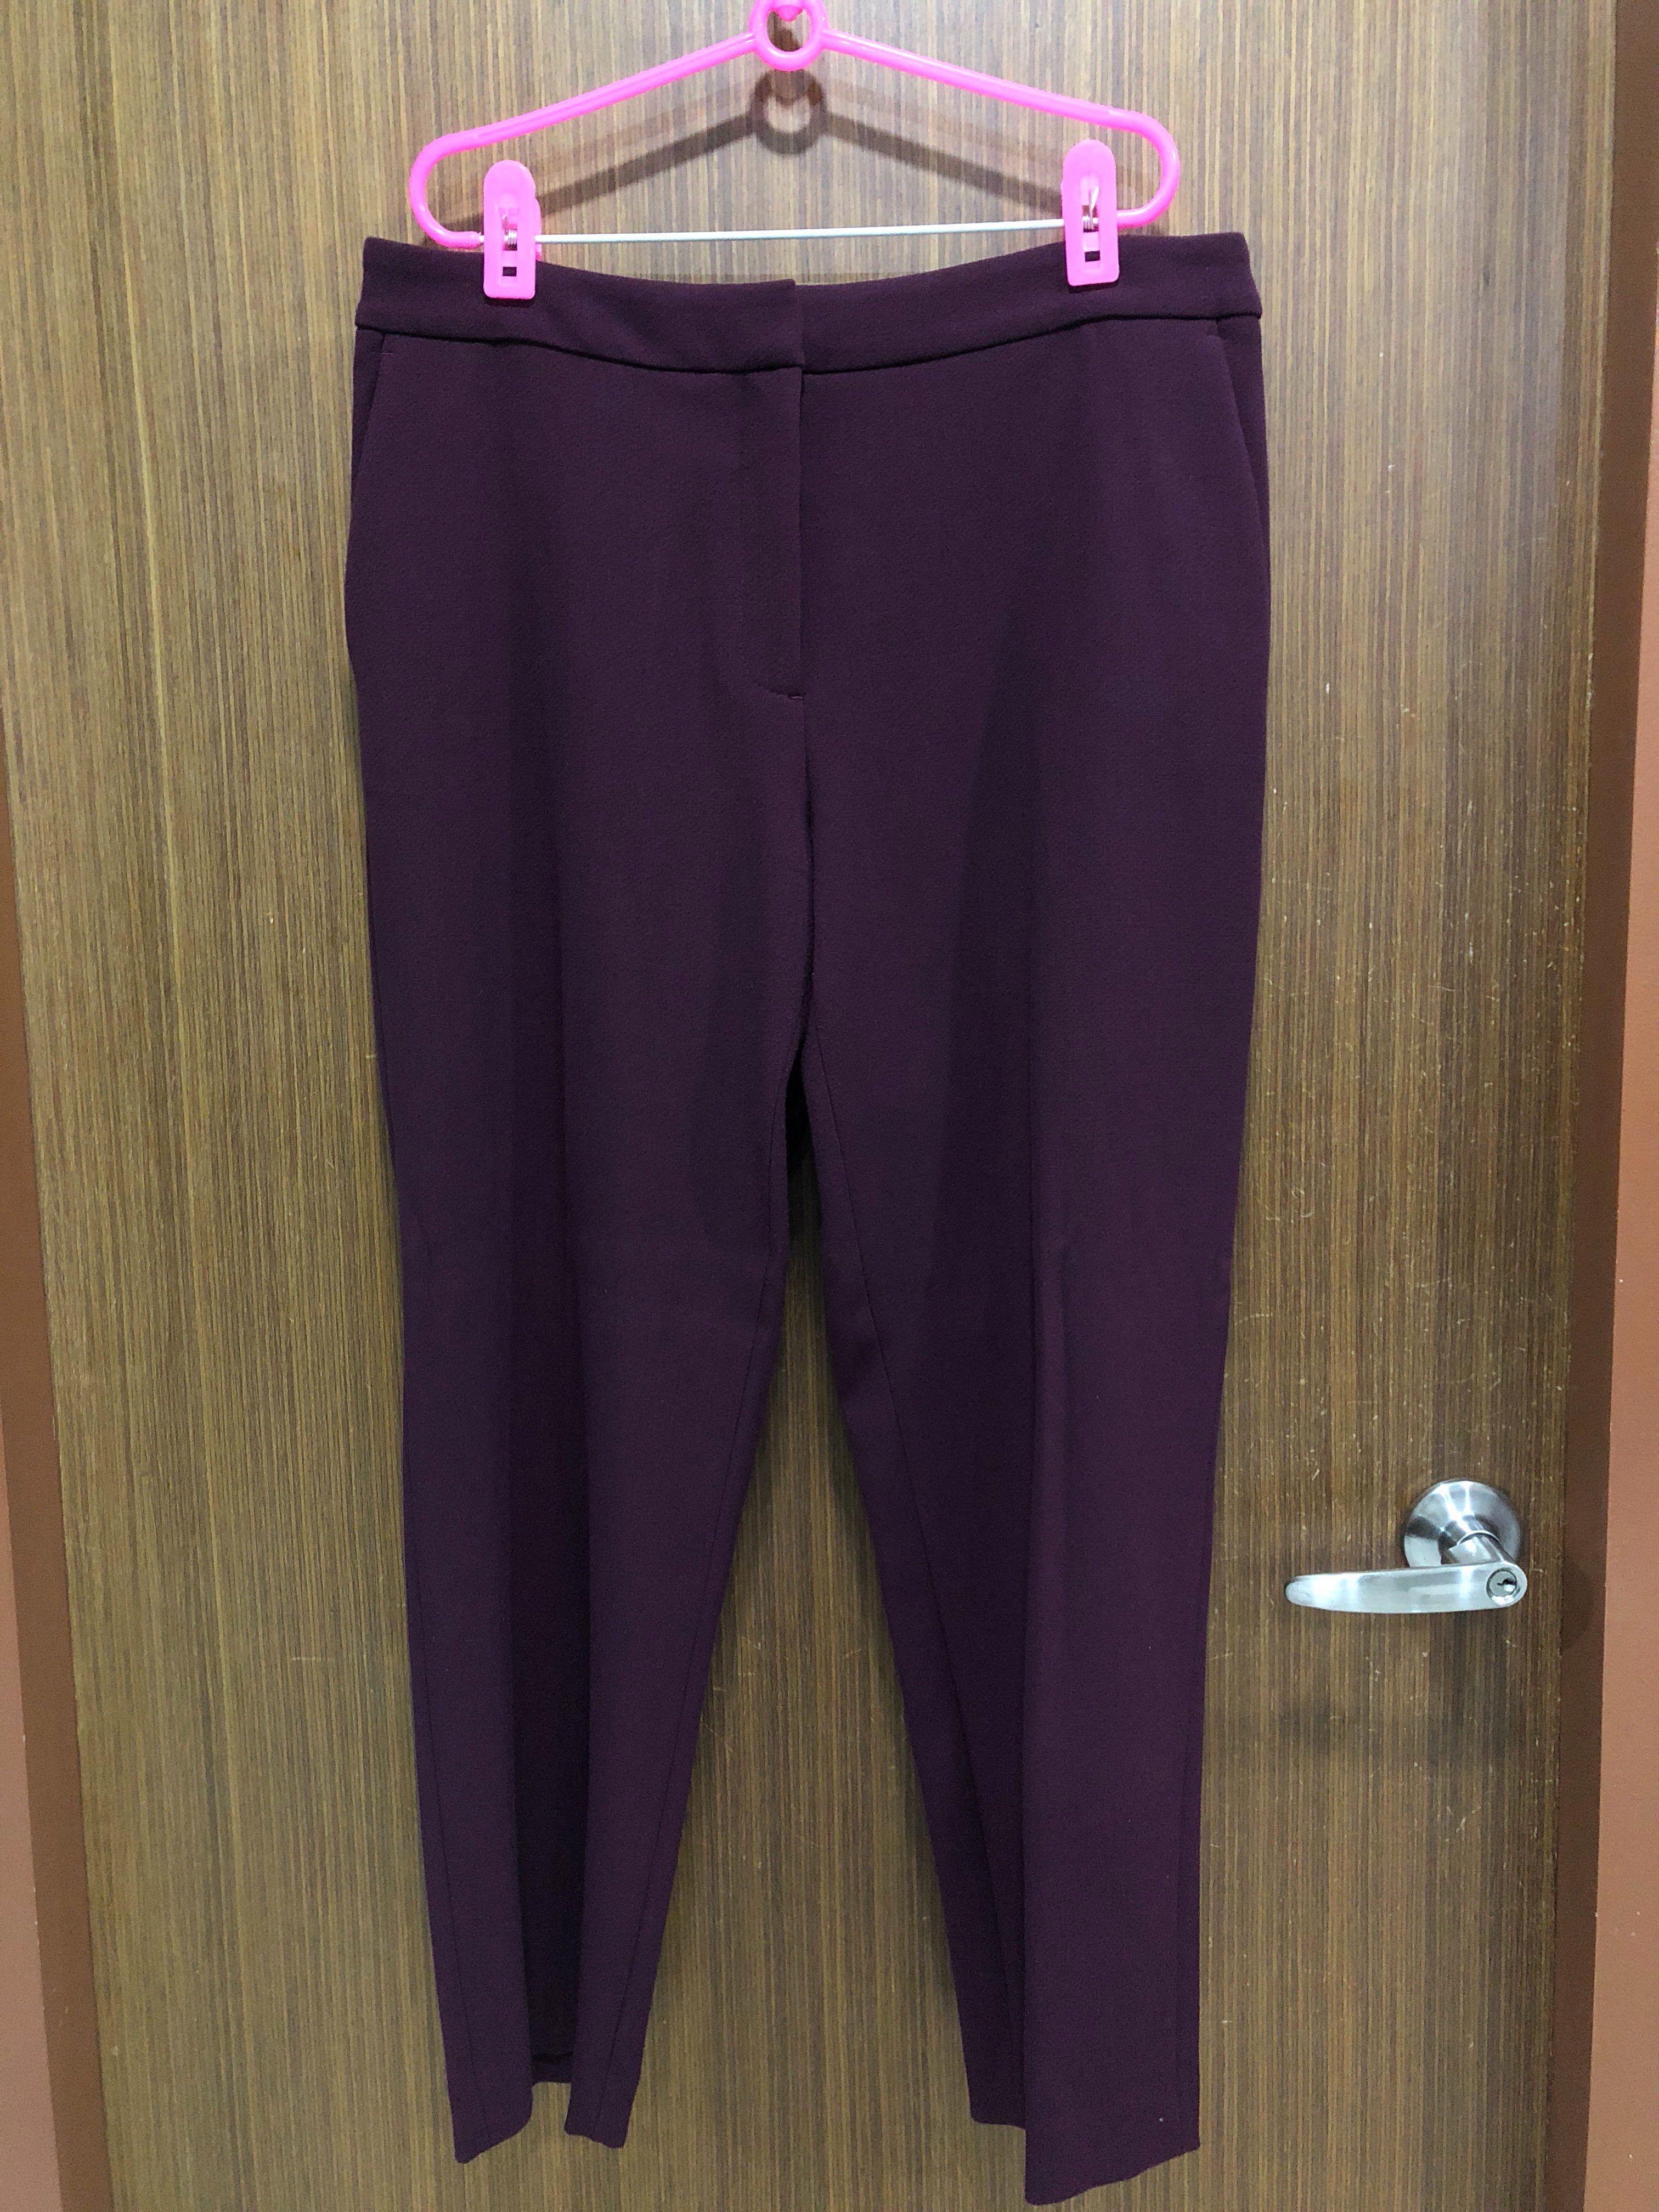 plum colored jeans